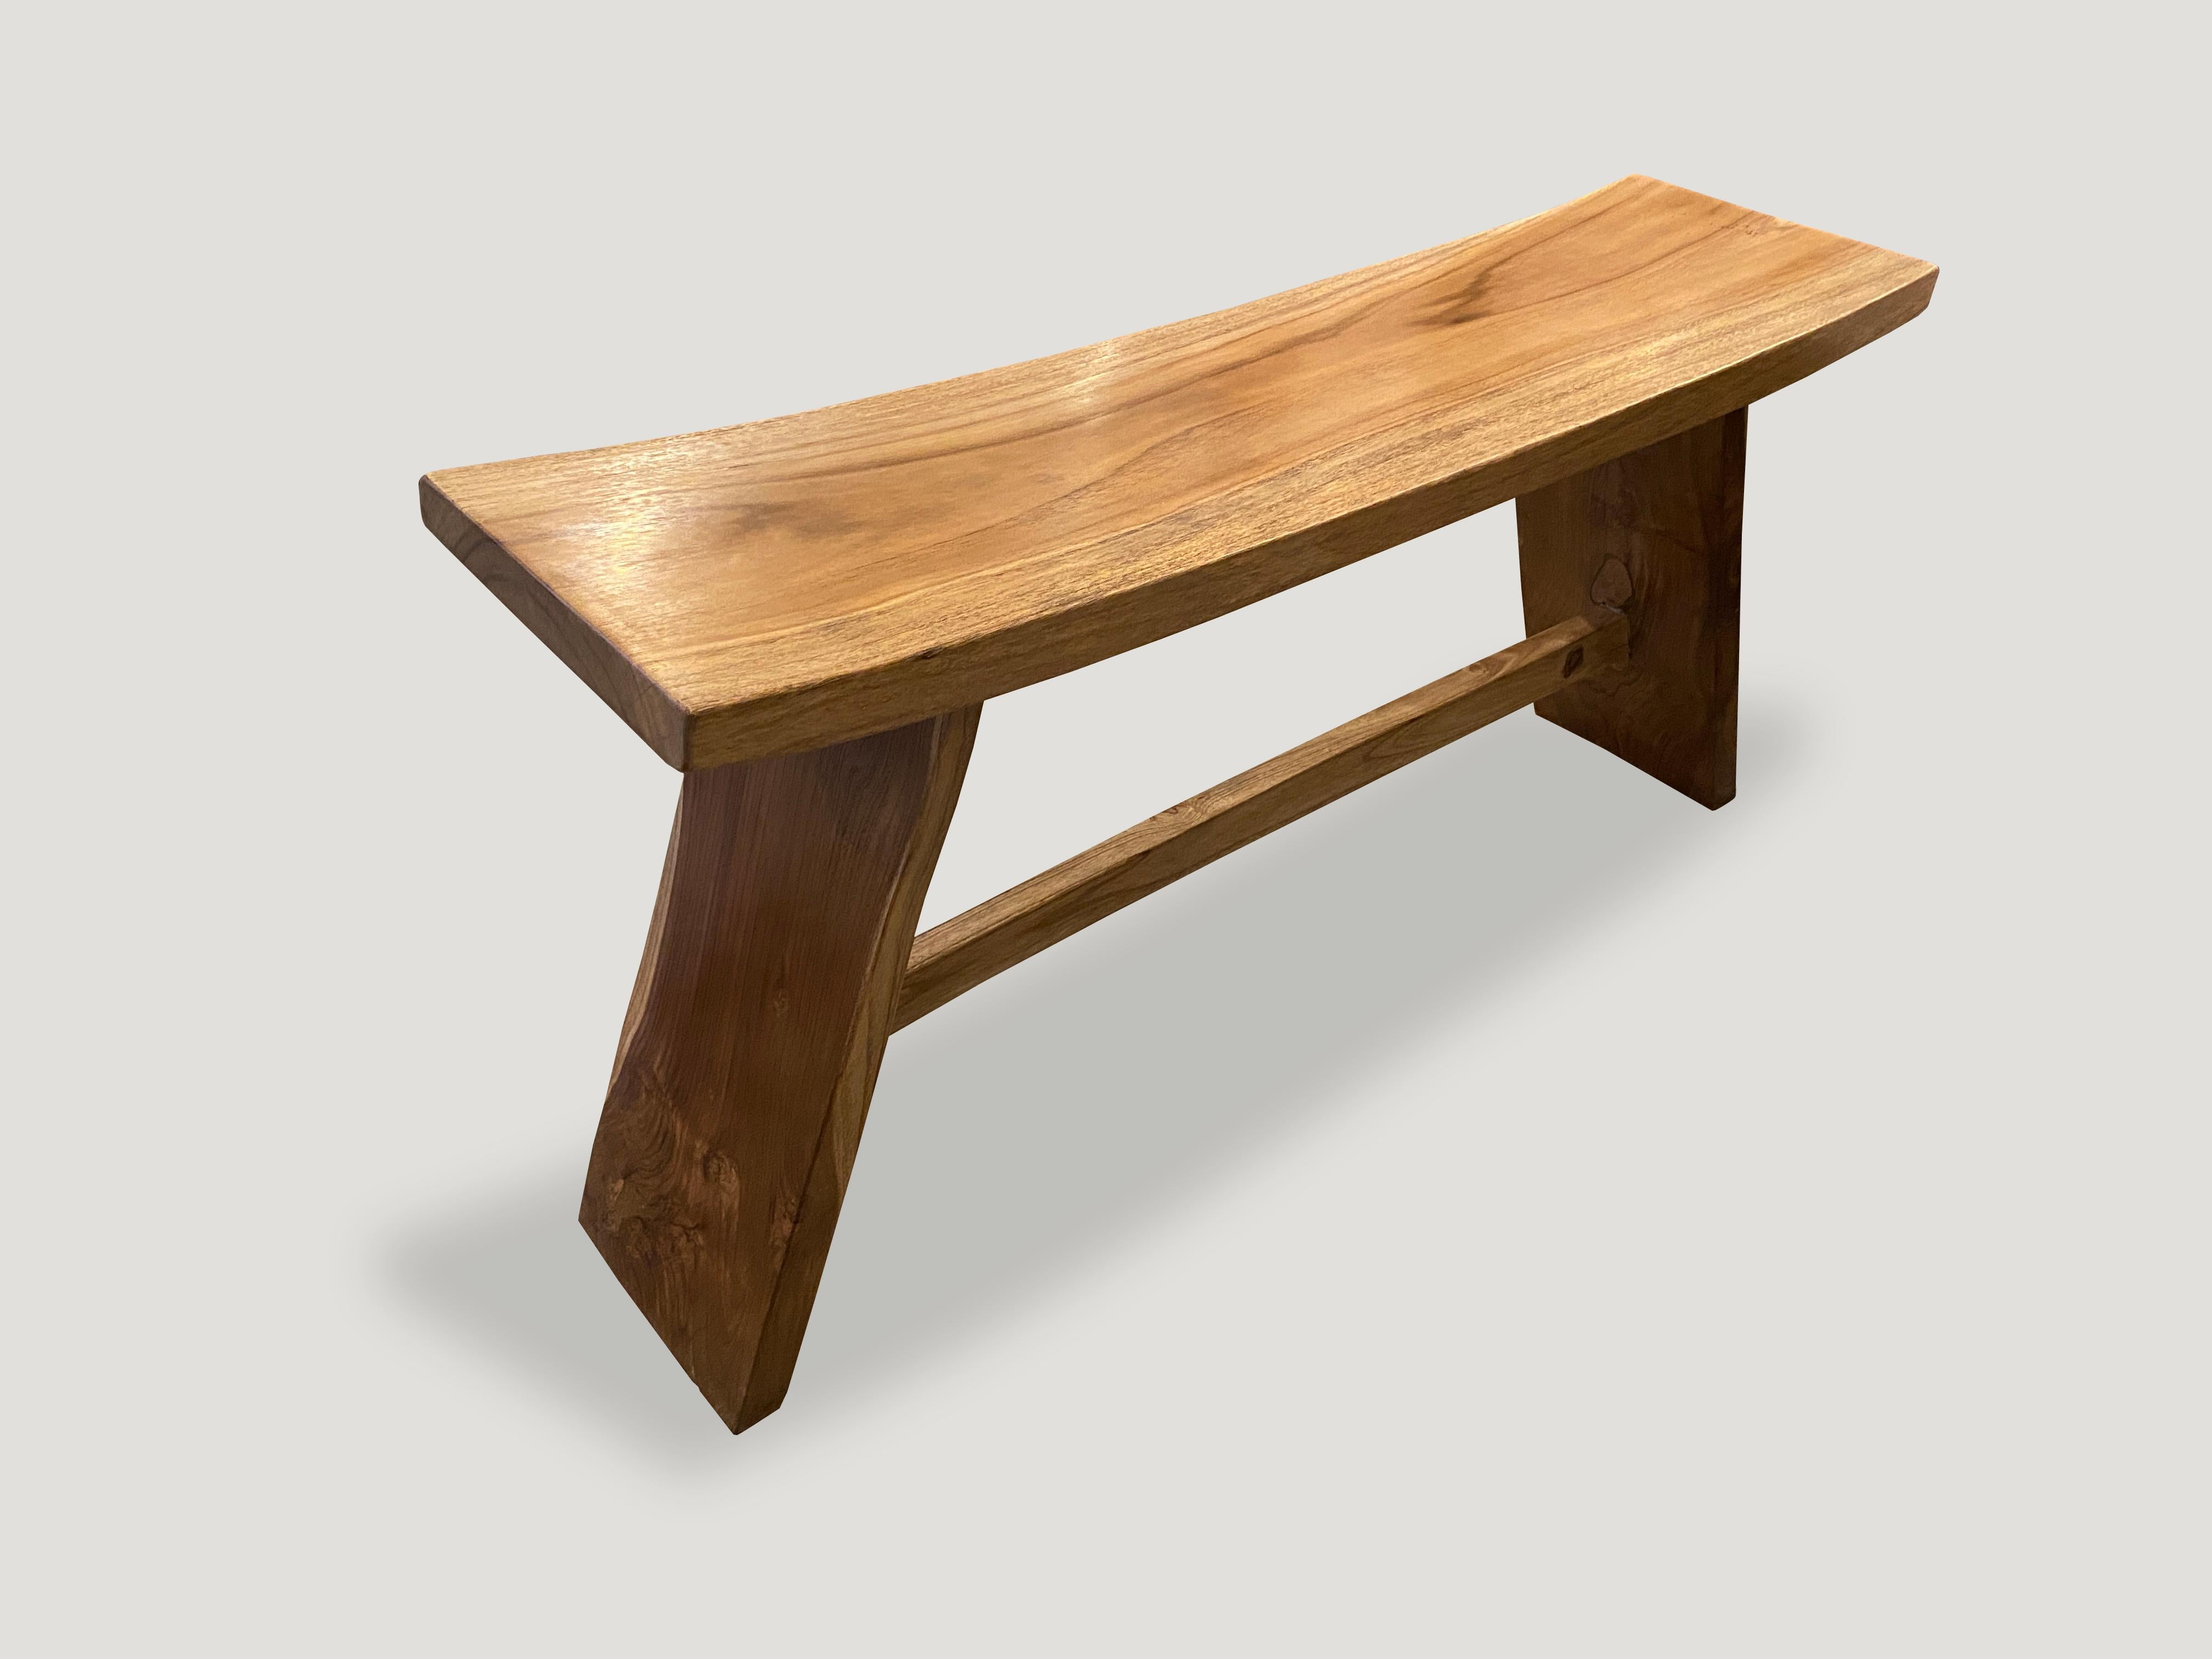 Beautiful grain on this reclaimed teak wood bench with a smooth, oil finish. The top is made from a solid teak wood slab. Perfect for inside or outside living.

Andrianna Shamaris. The Leader In Modern Organic Design.